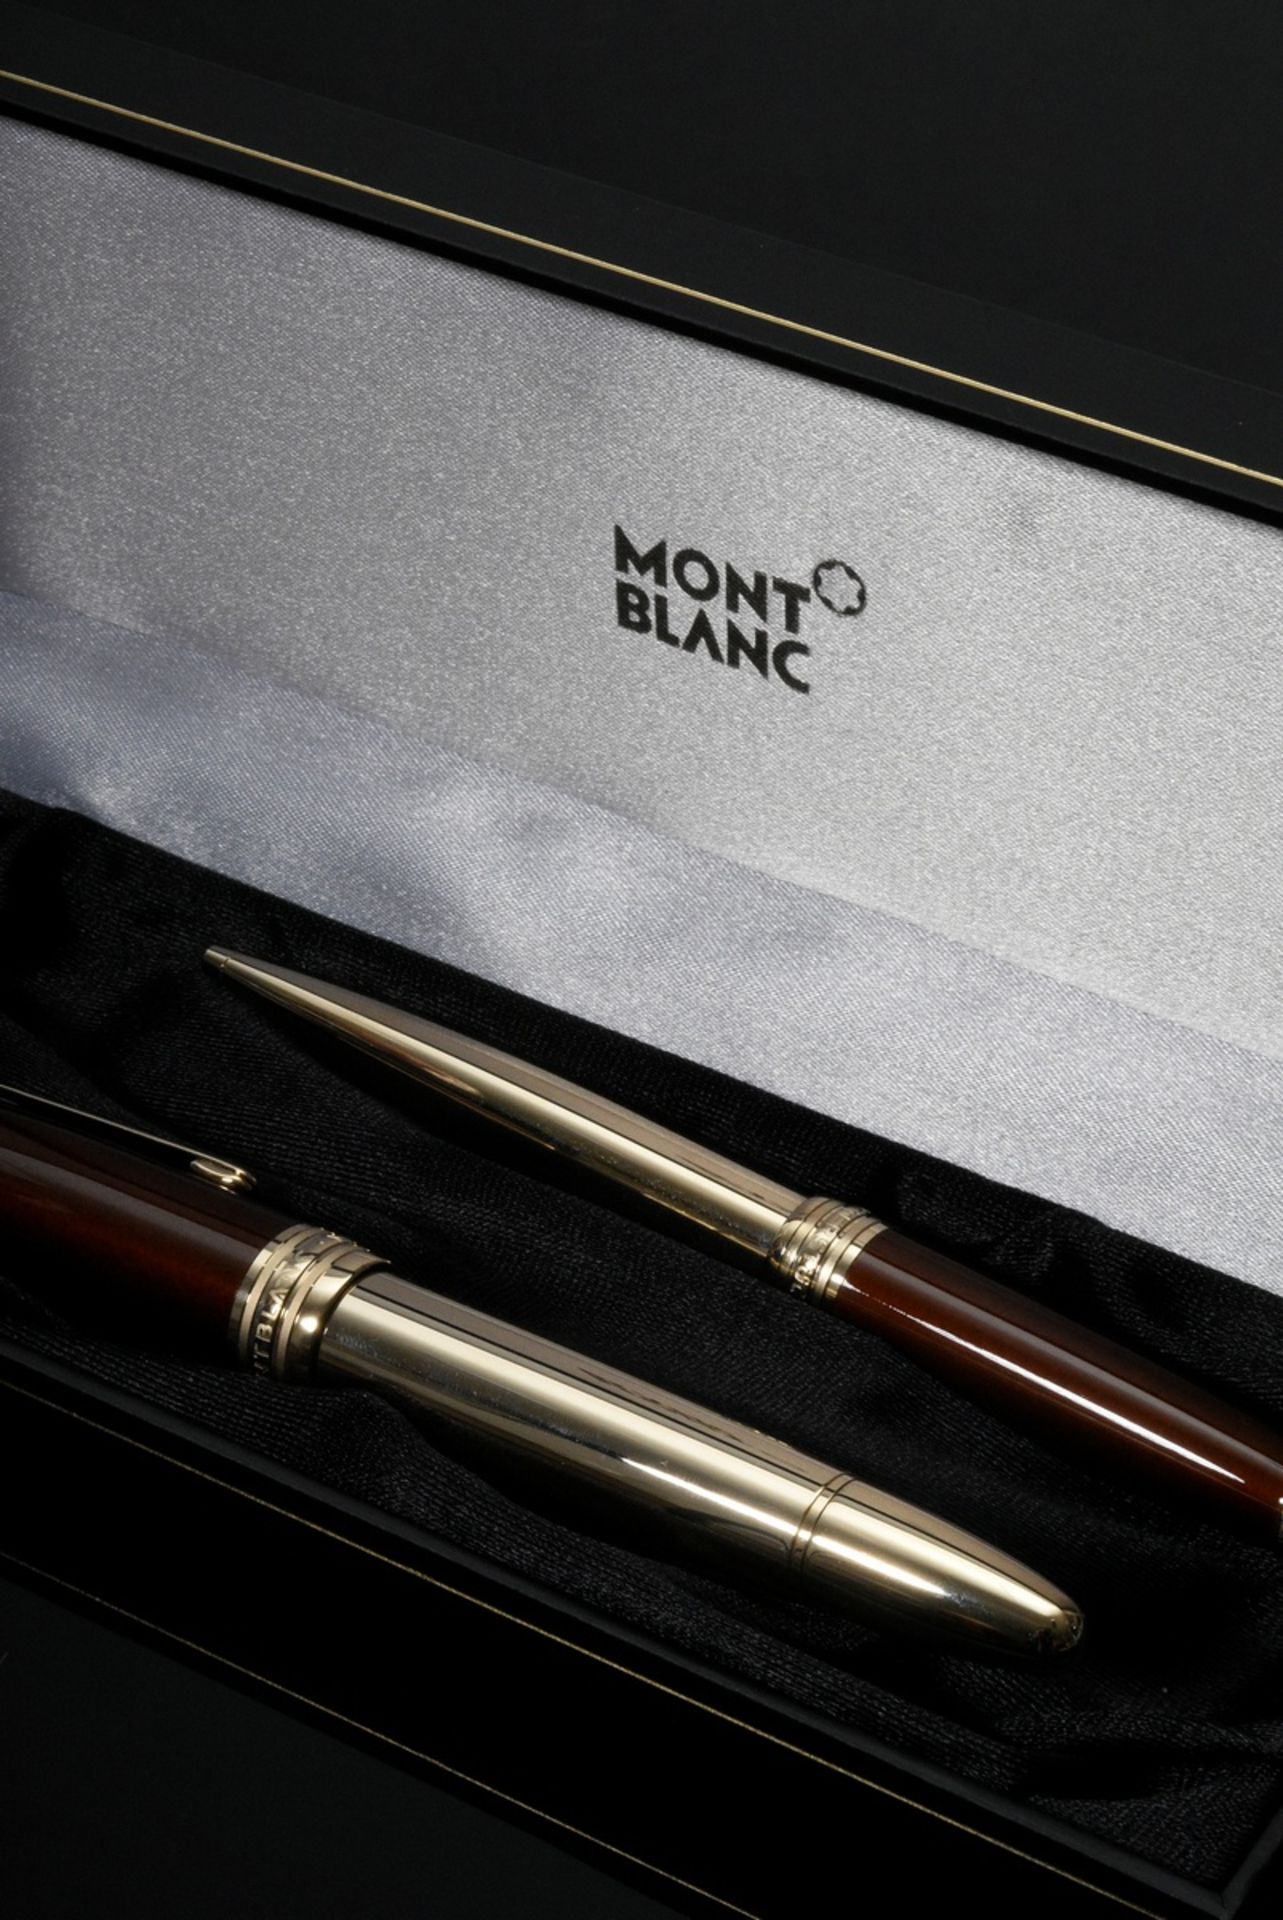 2 Pieces Montblanc fountain pen and biros: "Meisterstück Solitaire Citrine", stainless steel gold p - Image 3 of 7